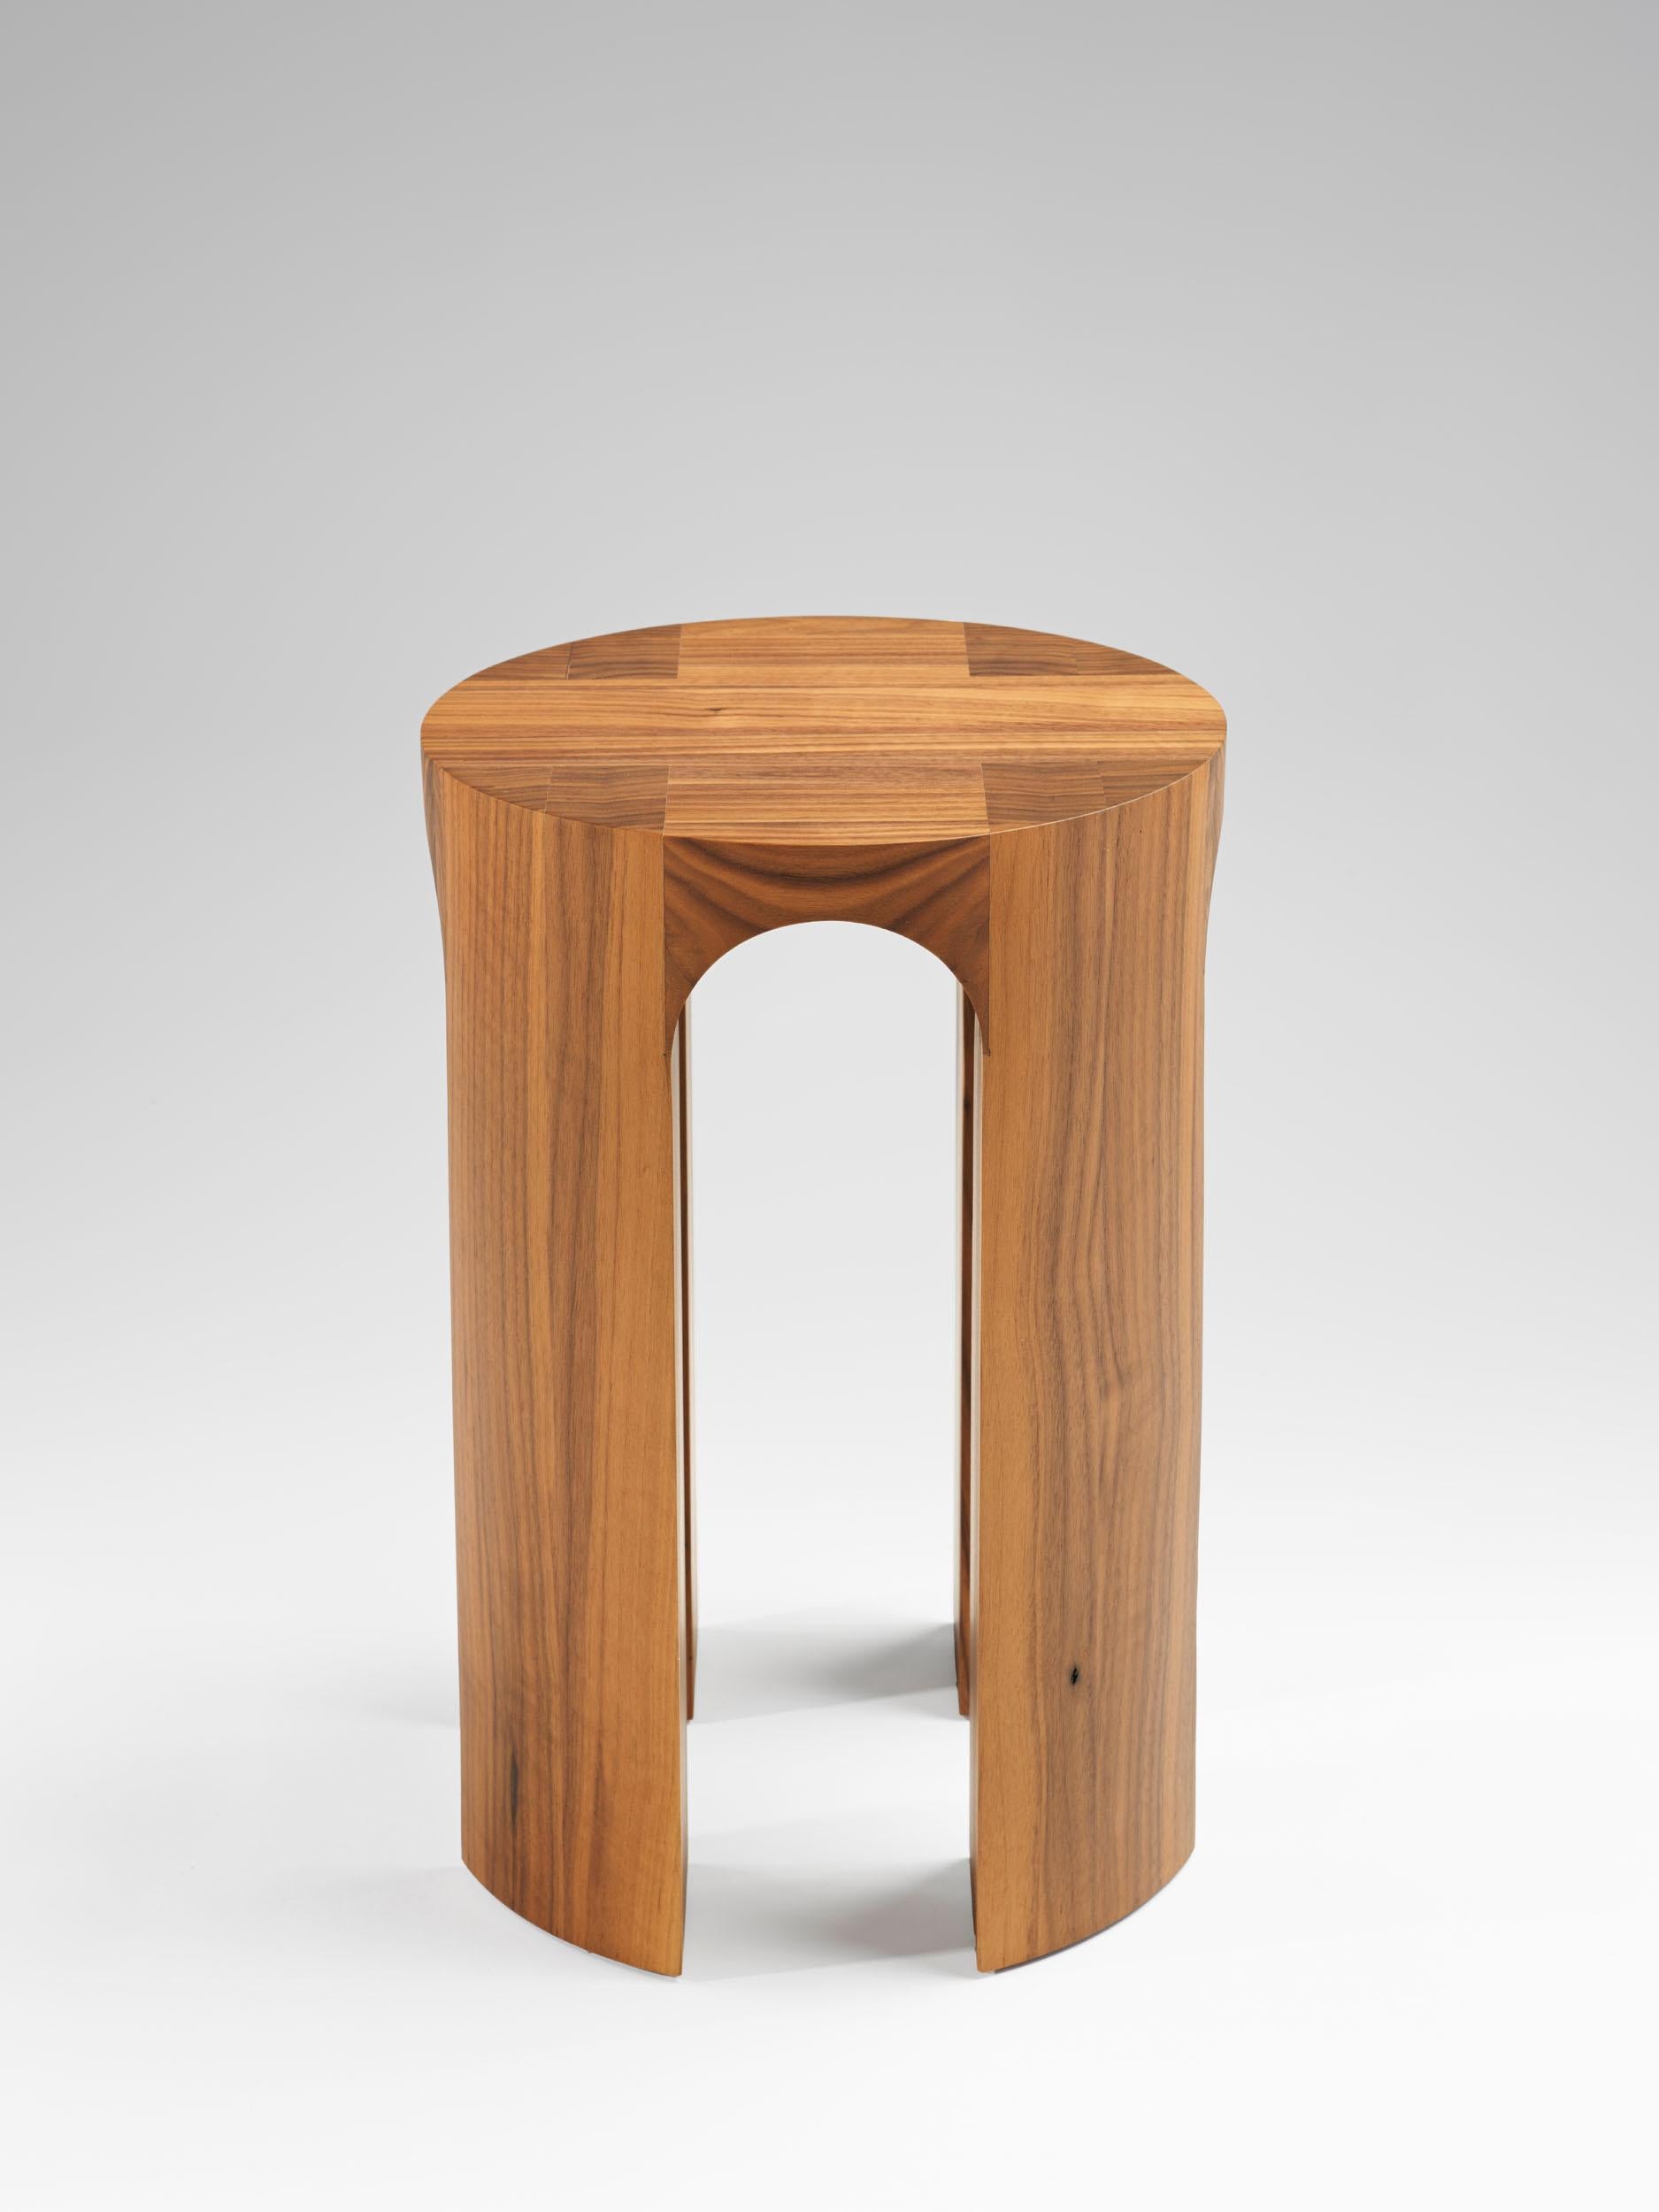 Contemporary Solid American Walnut Arcus Stool by Tim Vranken In New Condition For Sale In 1204, CH